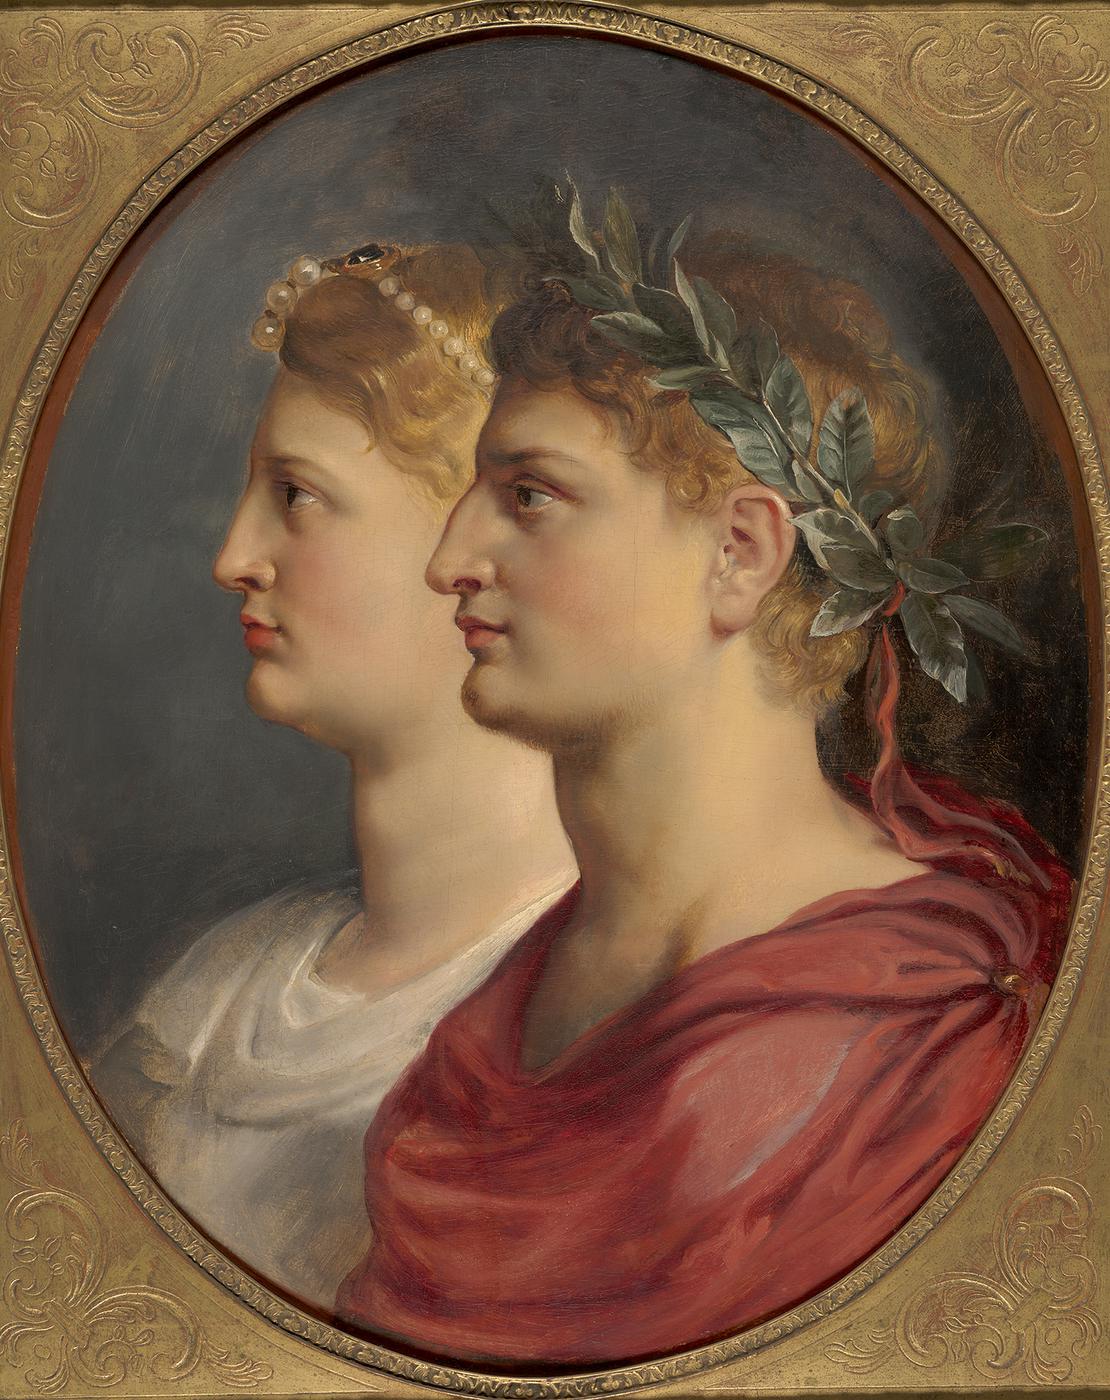 A painting of two people with light hair and skin, one wearing a laurel crown, shown in profile from the shoulders up